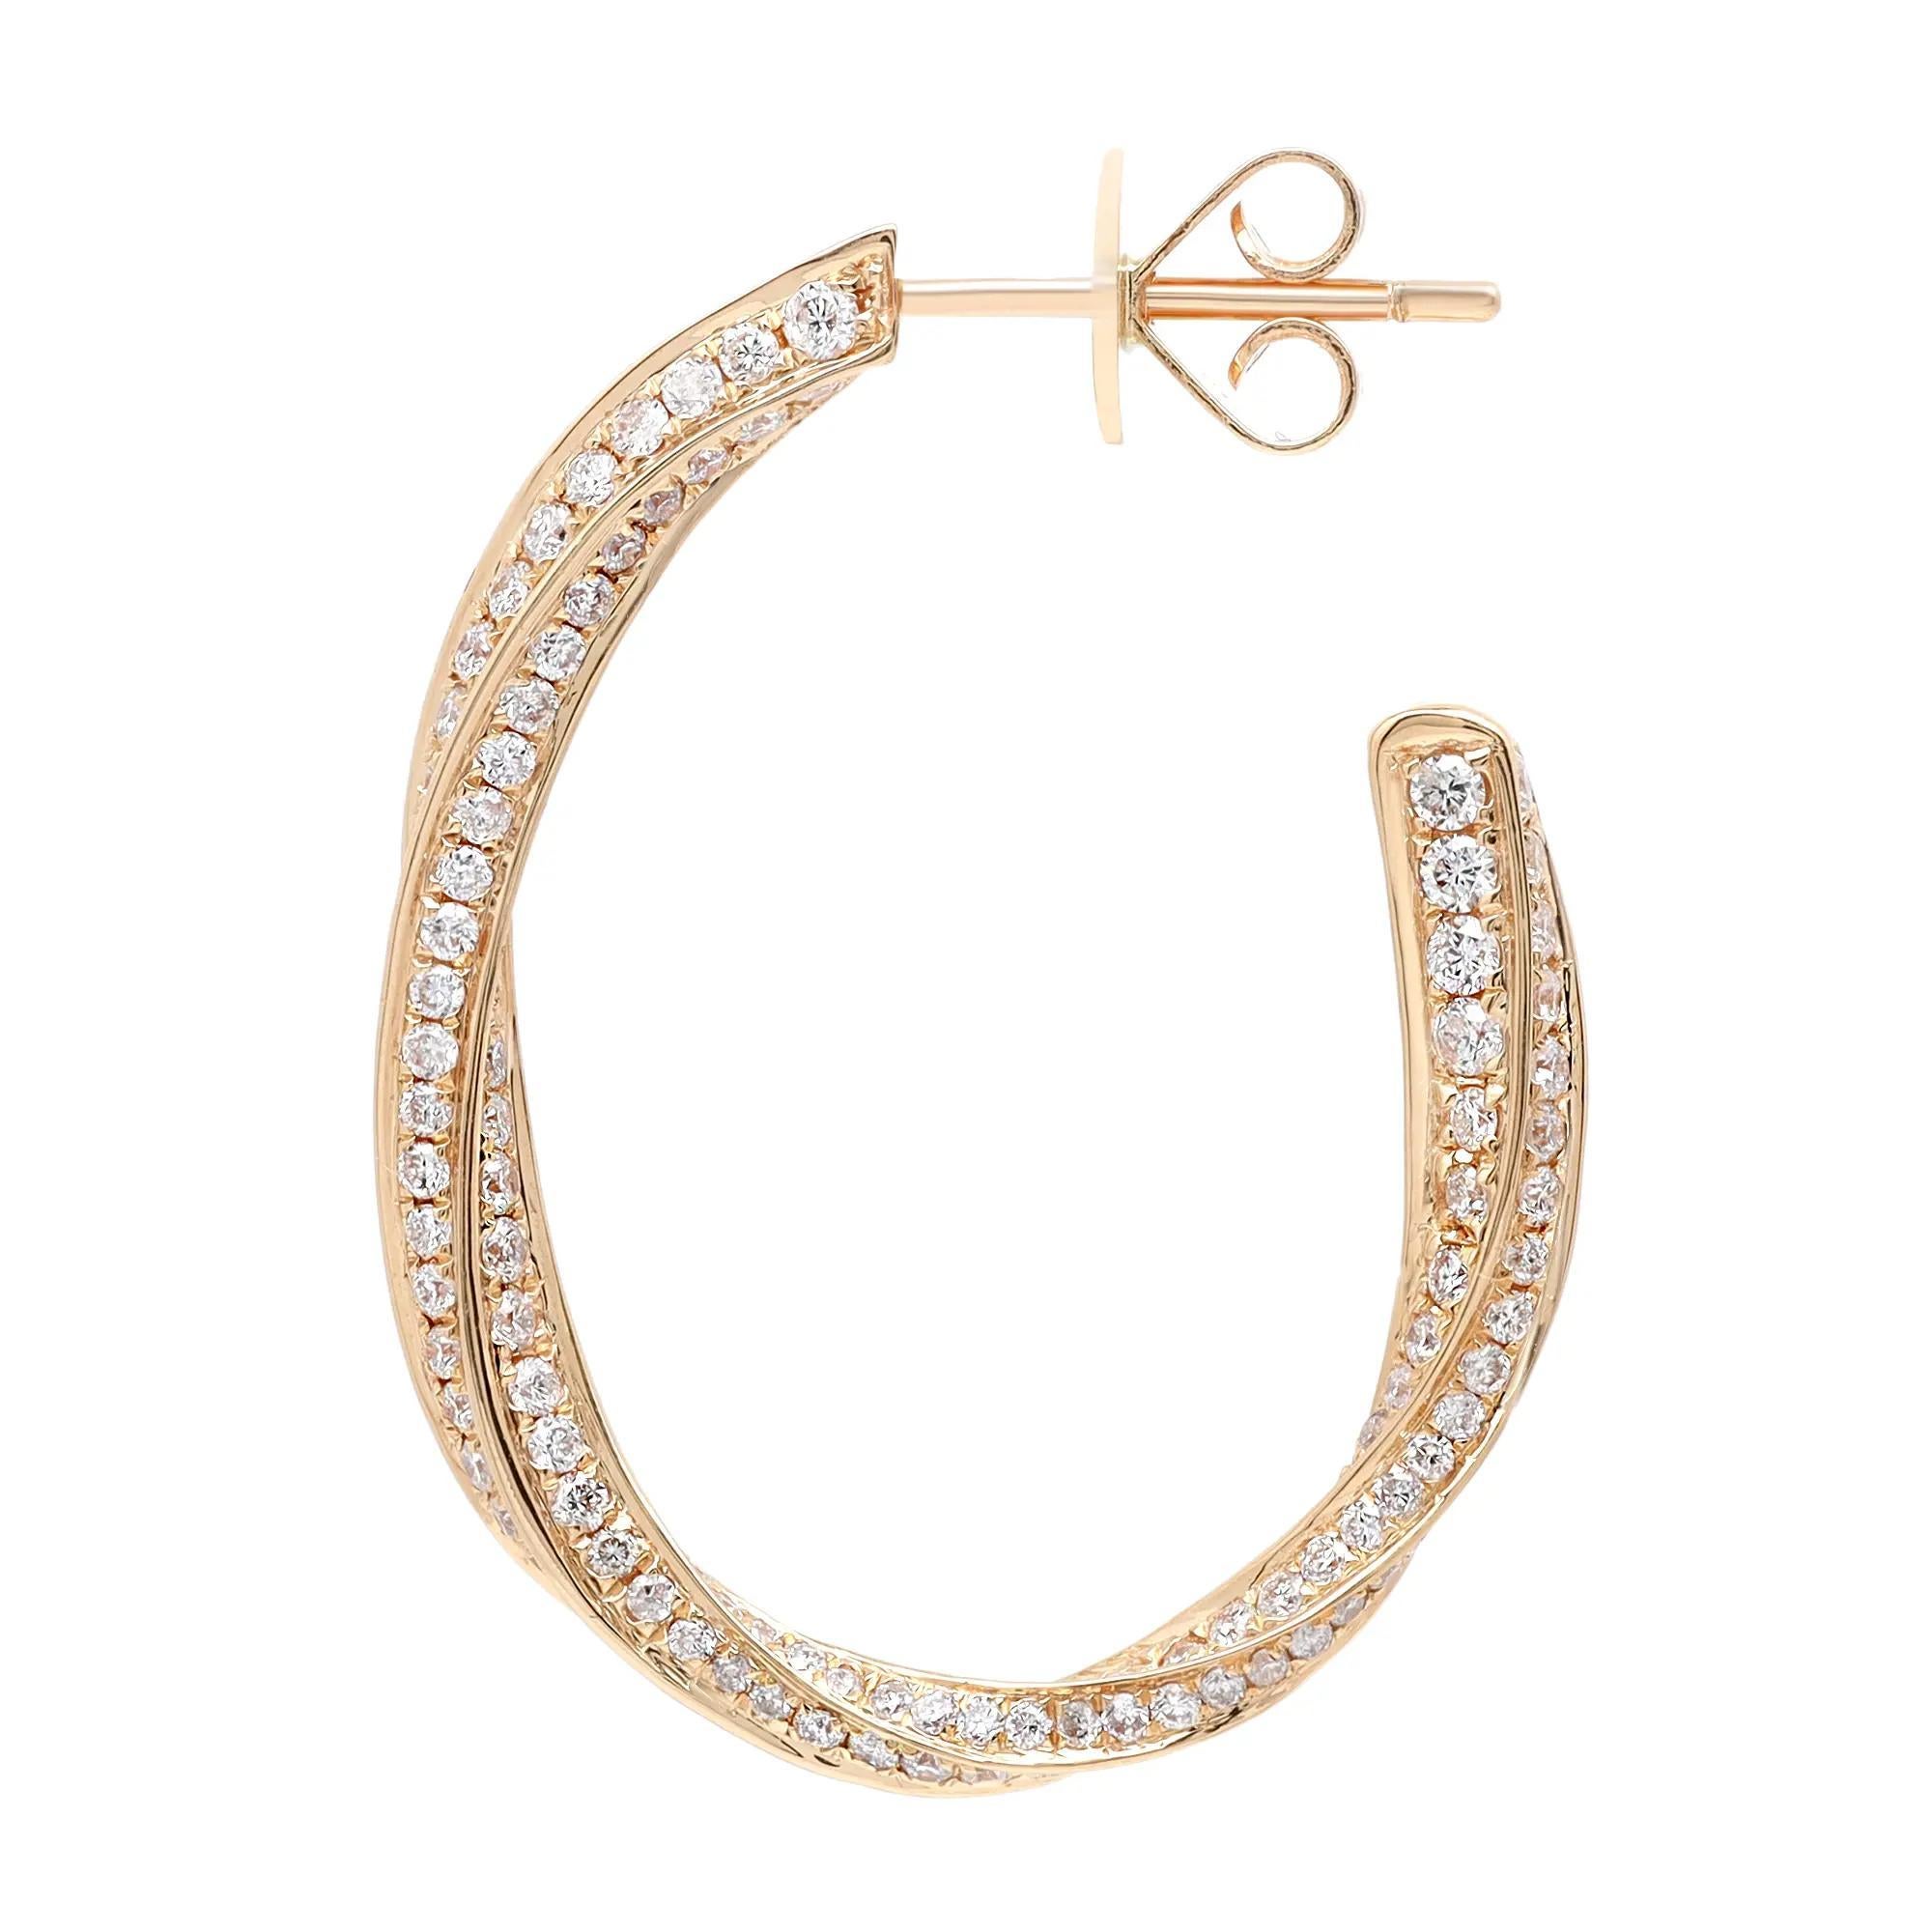 Dainty and dazzling diamond hoop earrings, perfect for a standout look. These earrings are crafted in fine high polished 18K yellow gold and pave set with bright white round cut diamonds weighing 2.04 carats. Diamond quality: color G-H and clarity